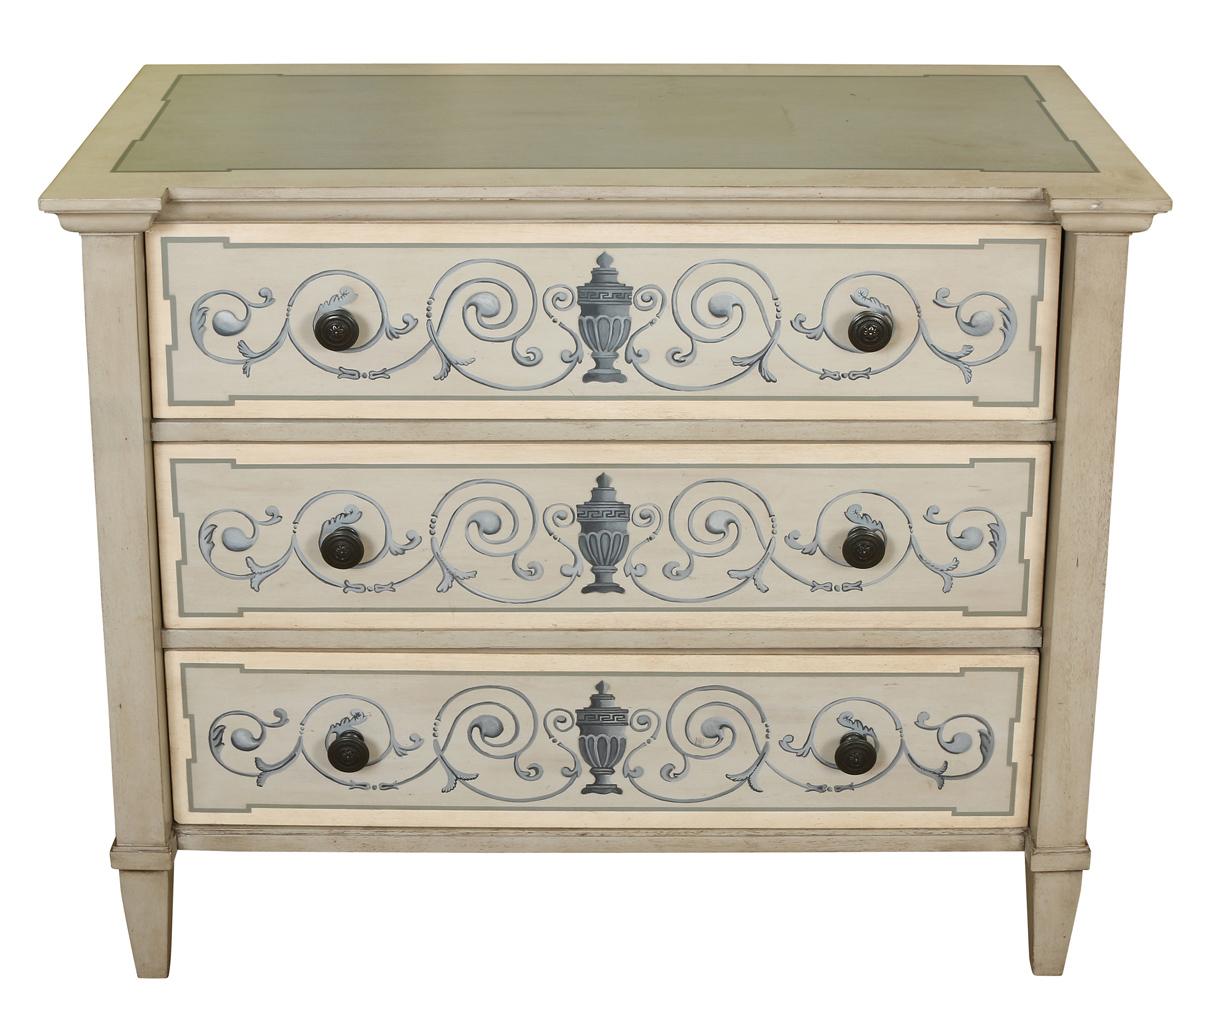 A charming chest painted in a blue gray with a neoclassical painted motif on each drawer. Each chest has three drawers and is raised on tapered feet. Priced separately at 1600 each.